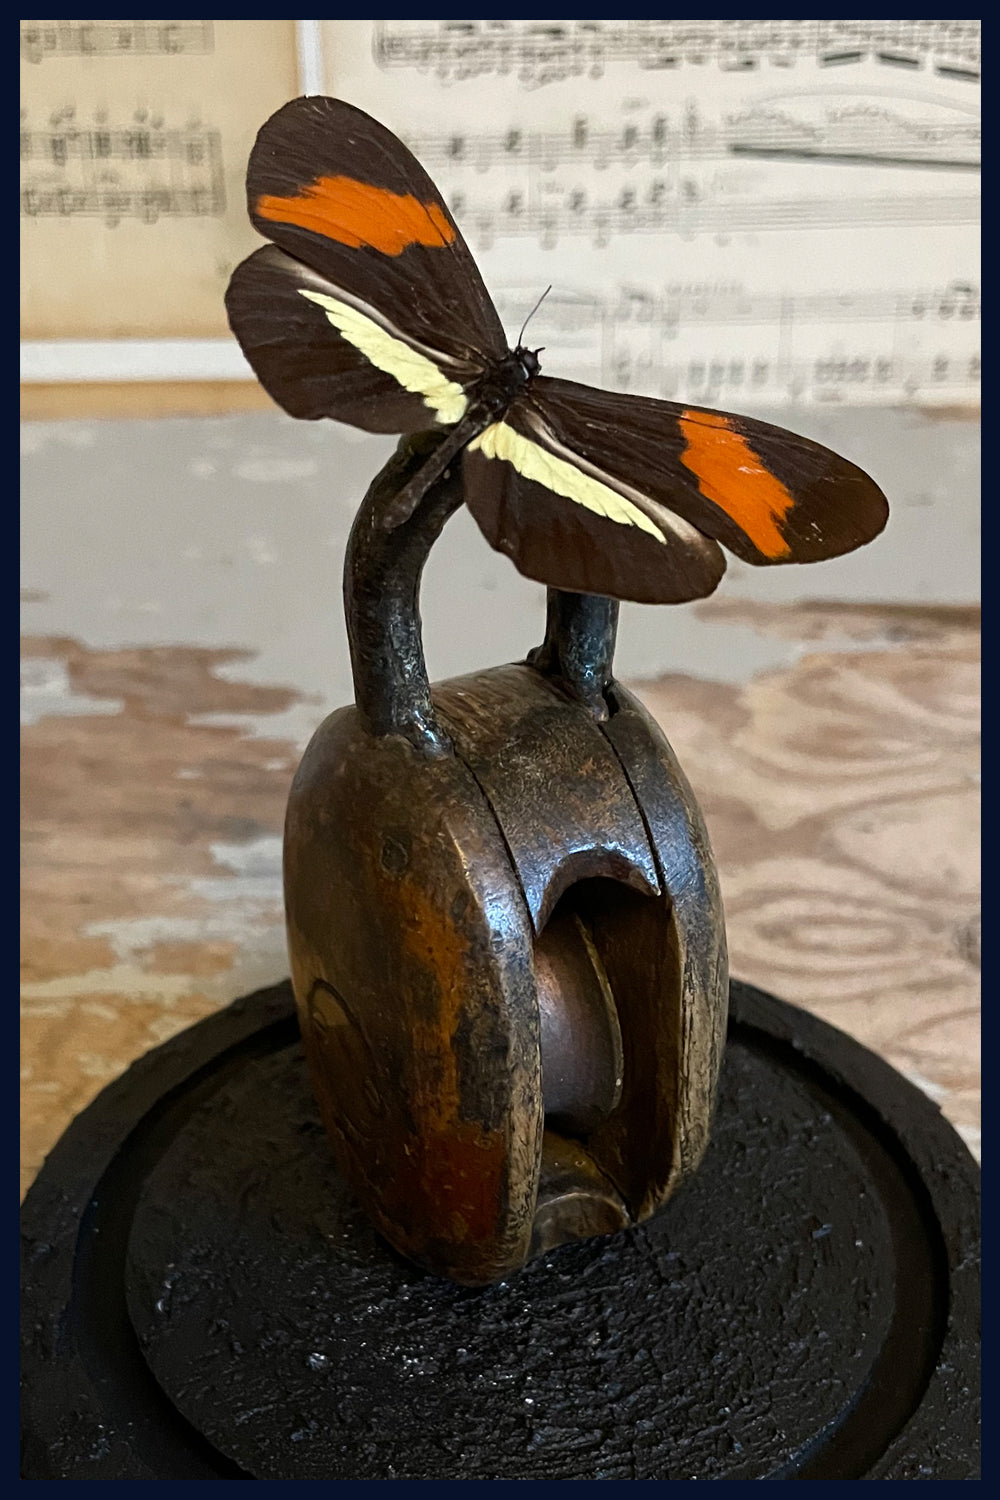 Enigma Variations Collection: Antique Wooden Pulley Block with a Real Butterfly in a Glass Display Dome